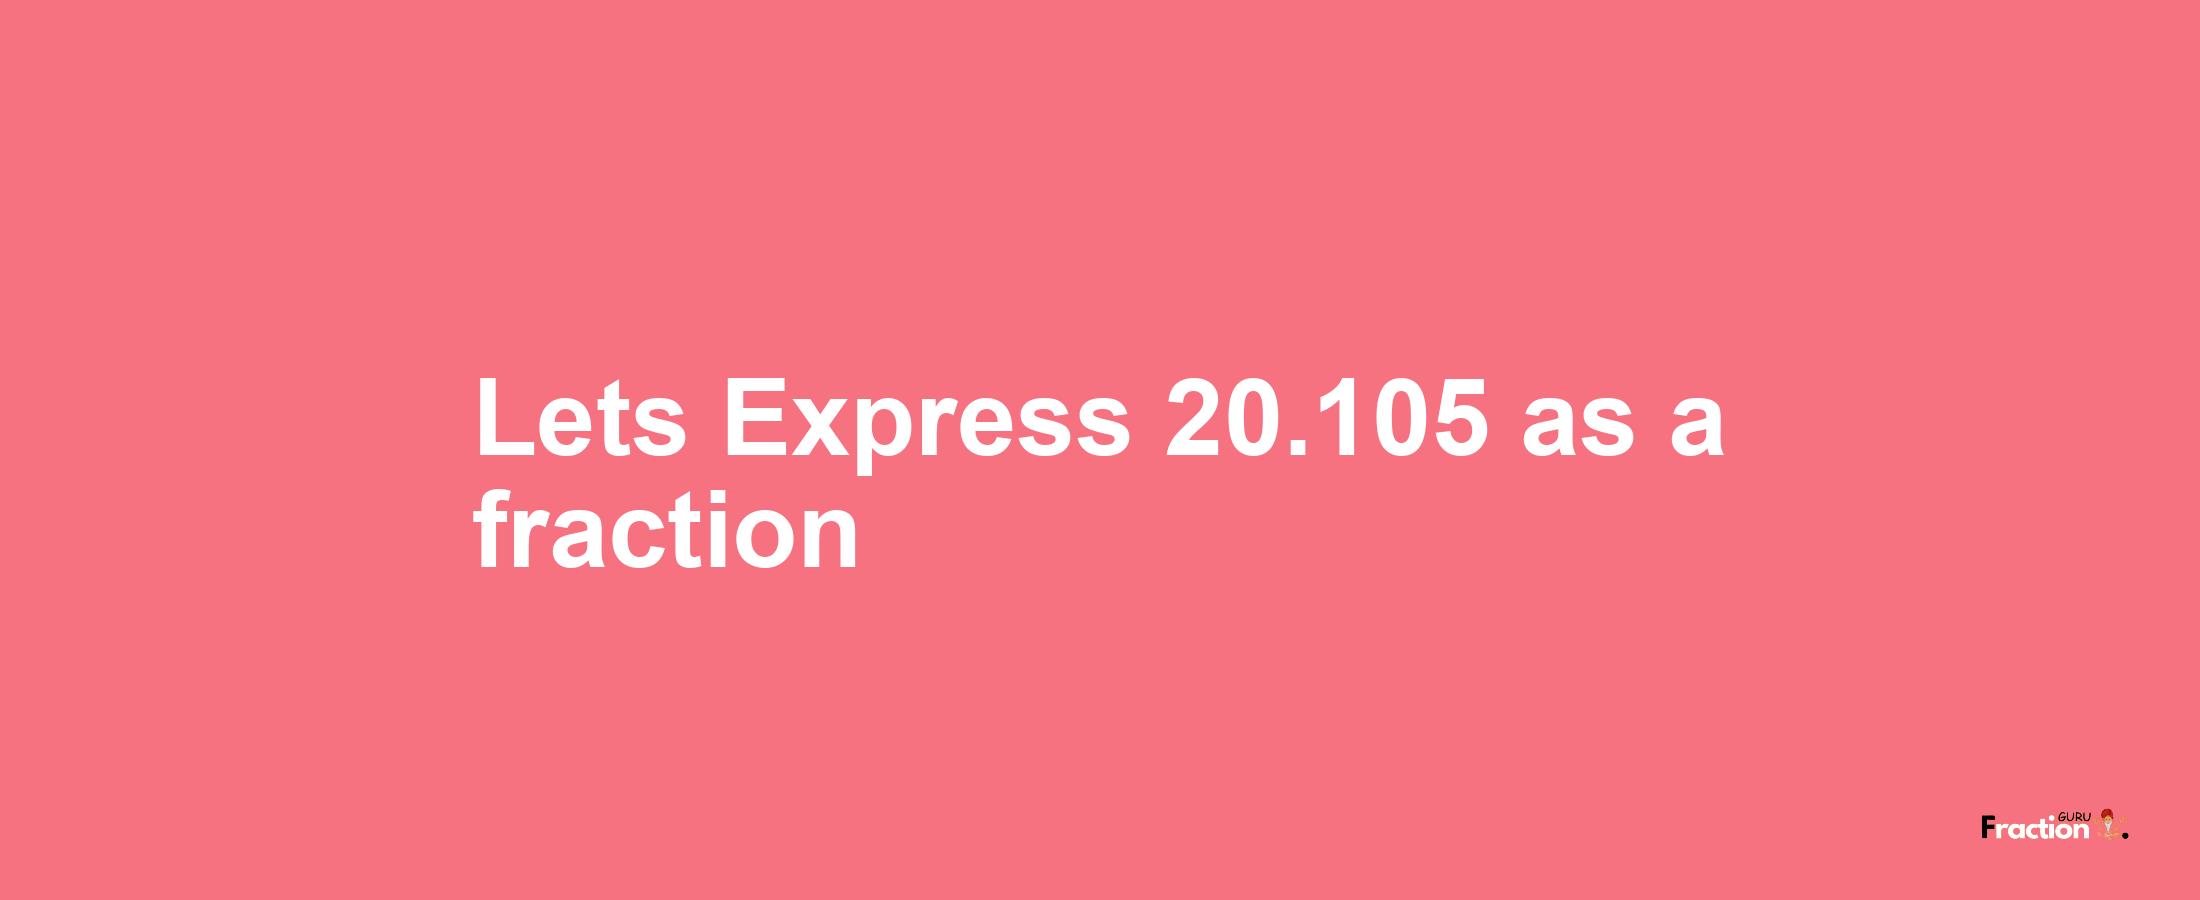 Lets Express 20.105 as afraction